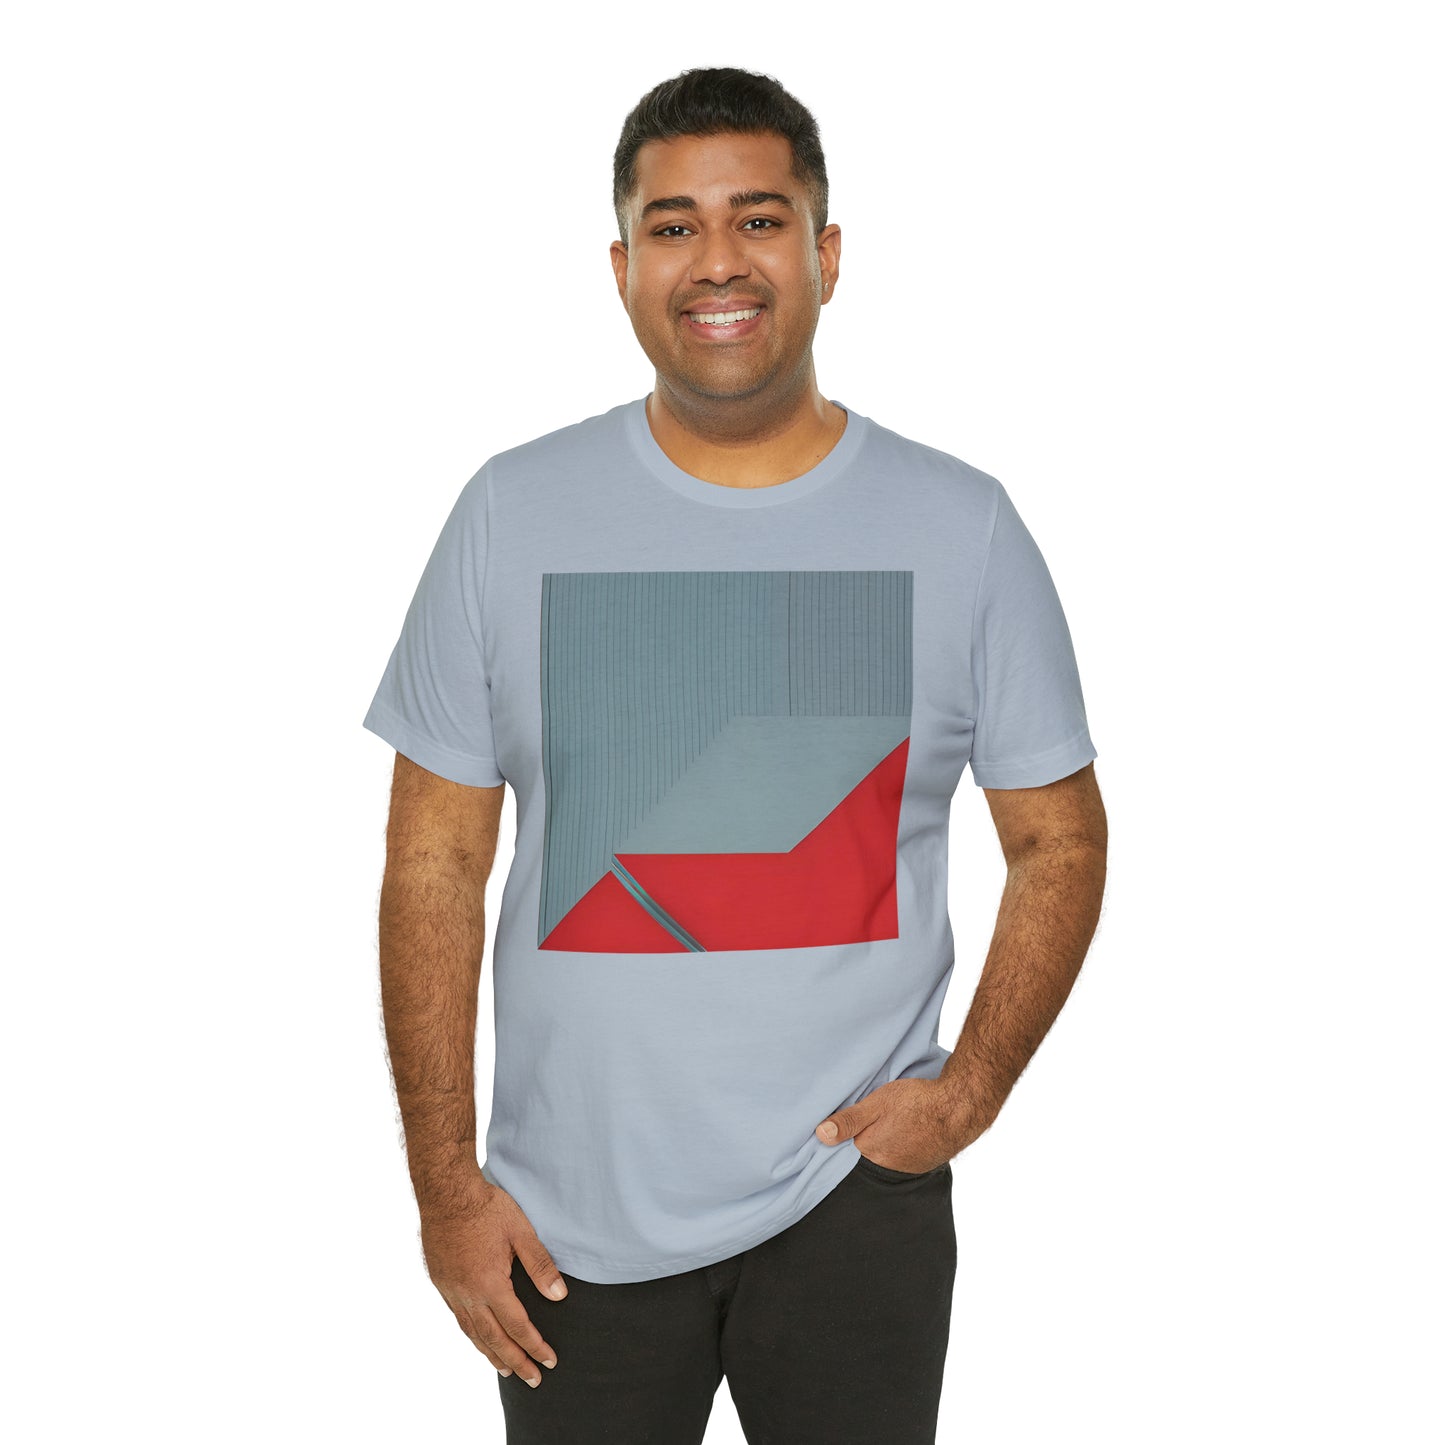 ABSTRACT SHAPES 101 - Unisex Jersey Short Sleeve Tee